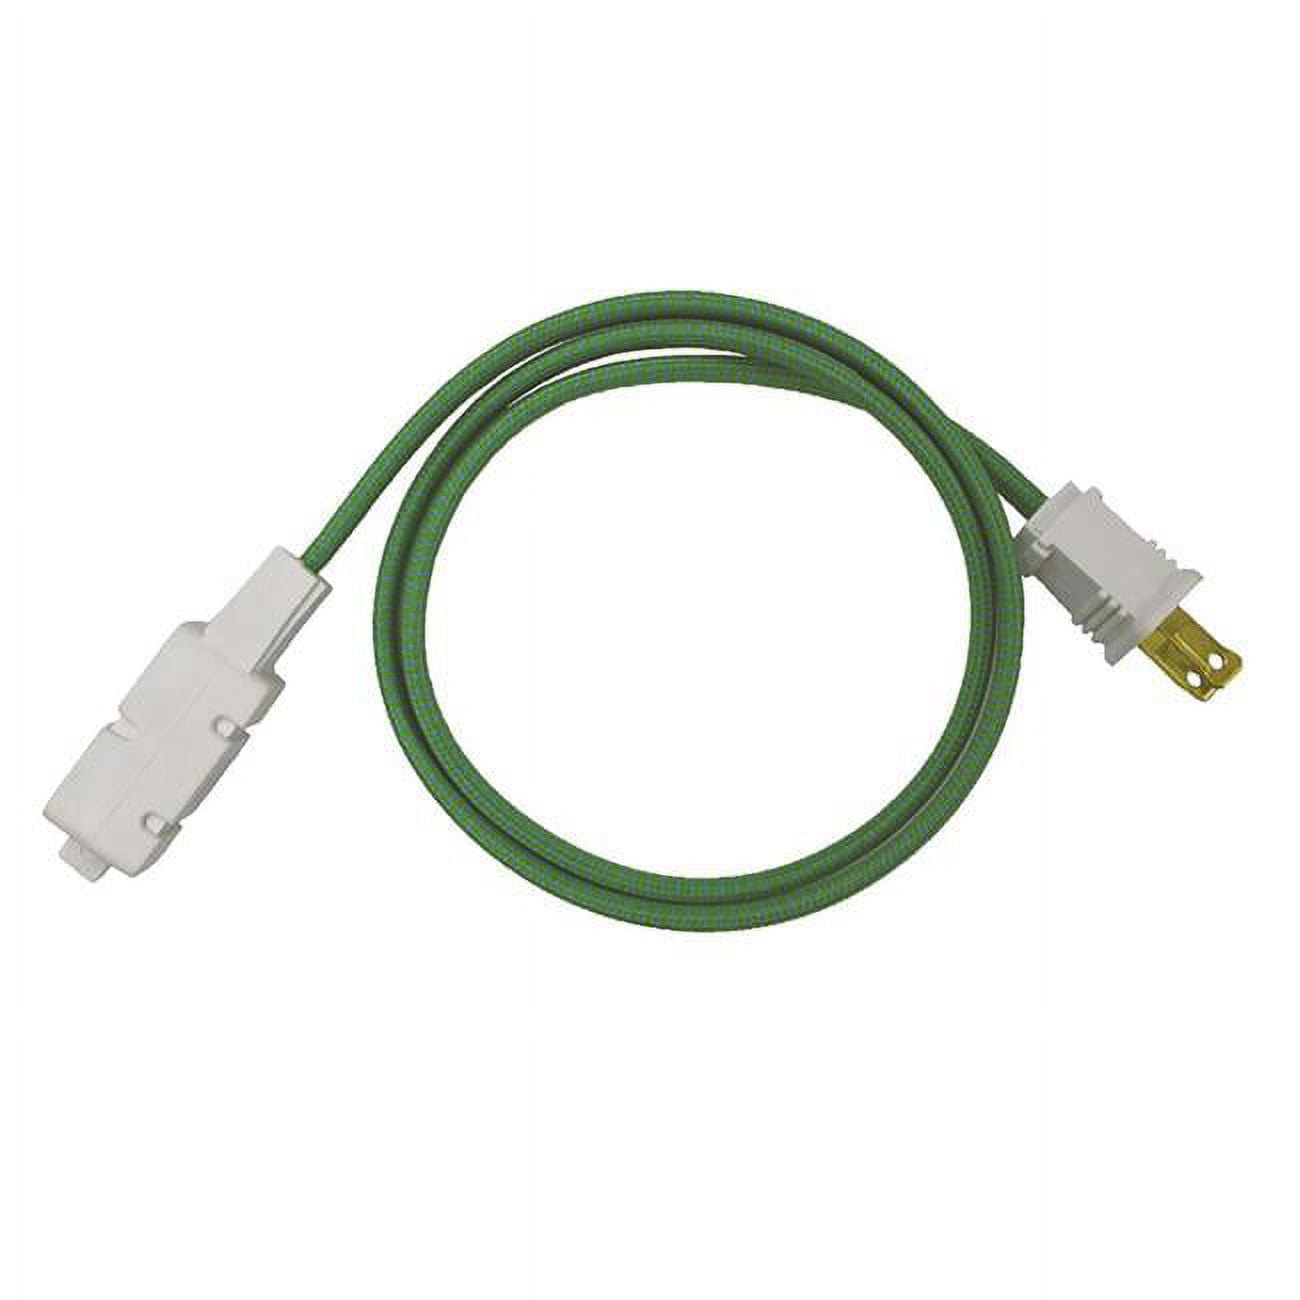 Picture of Fabcordz 3591195 6 ft. 16-2 Indoor Green Extension Cord